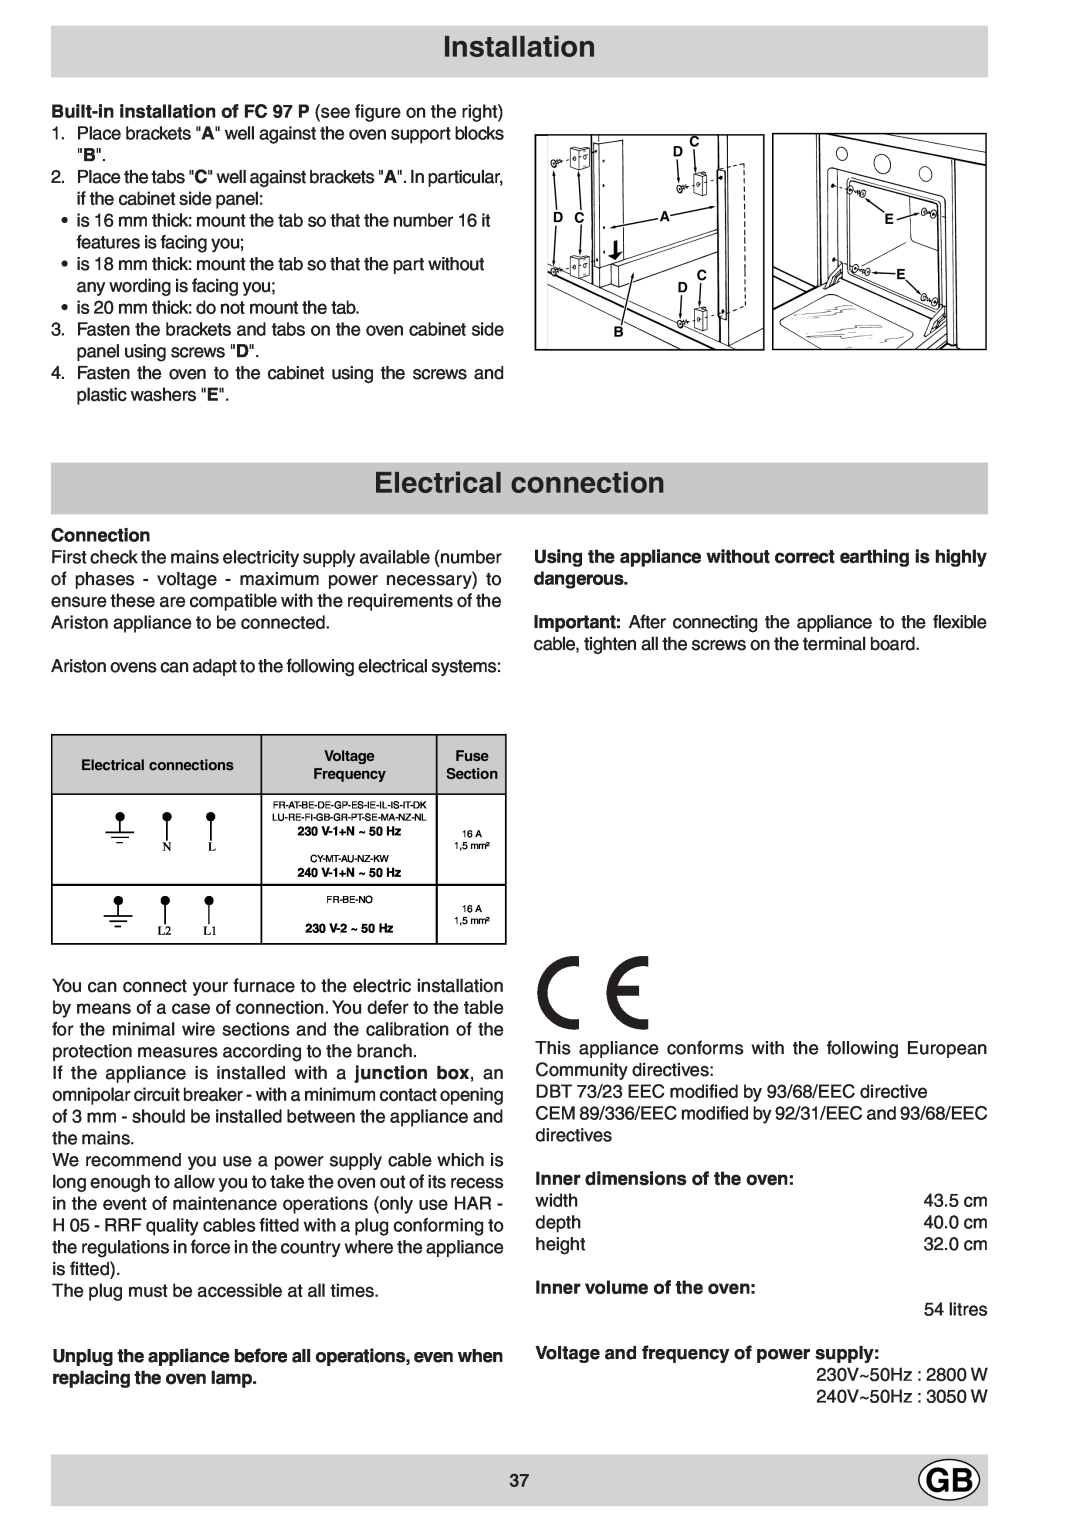 Ariston FC 97 P Electrical connection, Installation, Connection, Inner dimensions of the oven, Inner volume of the oven 